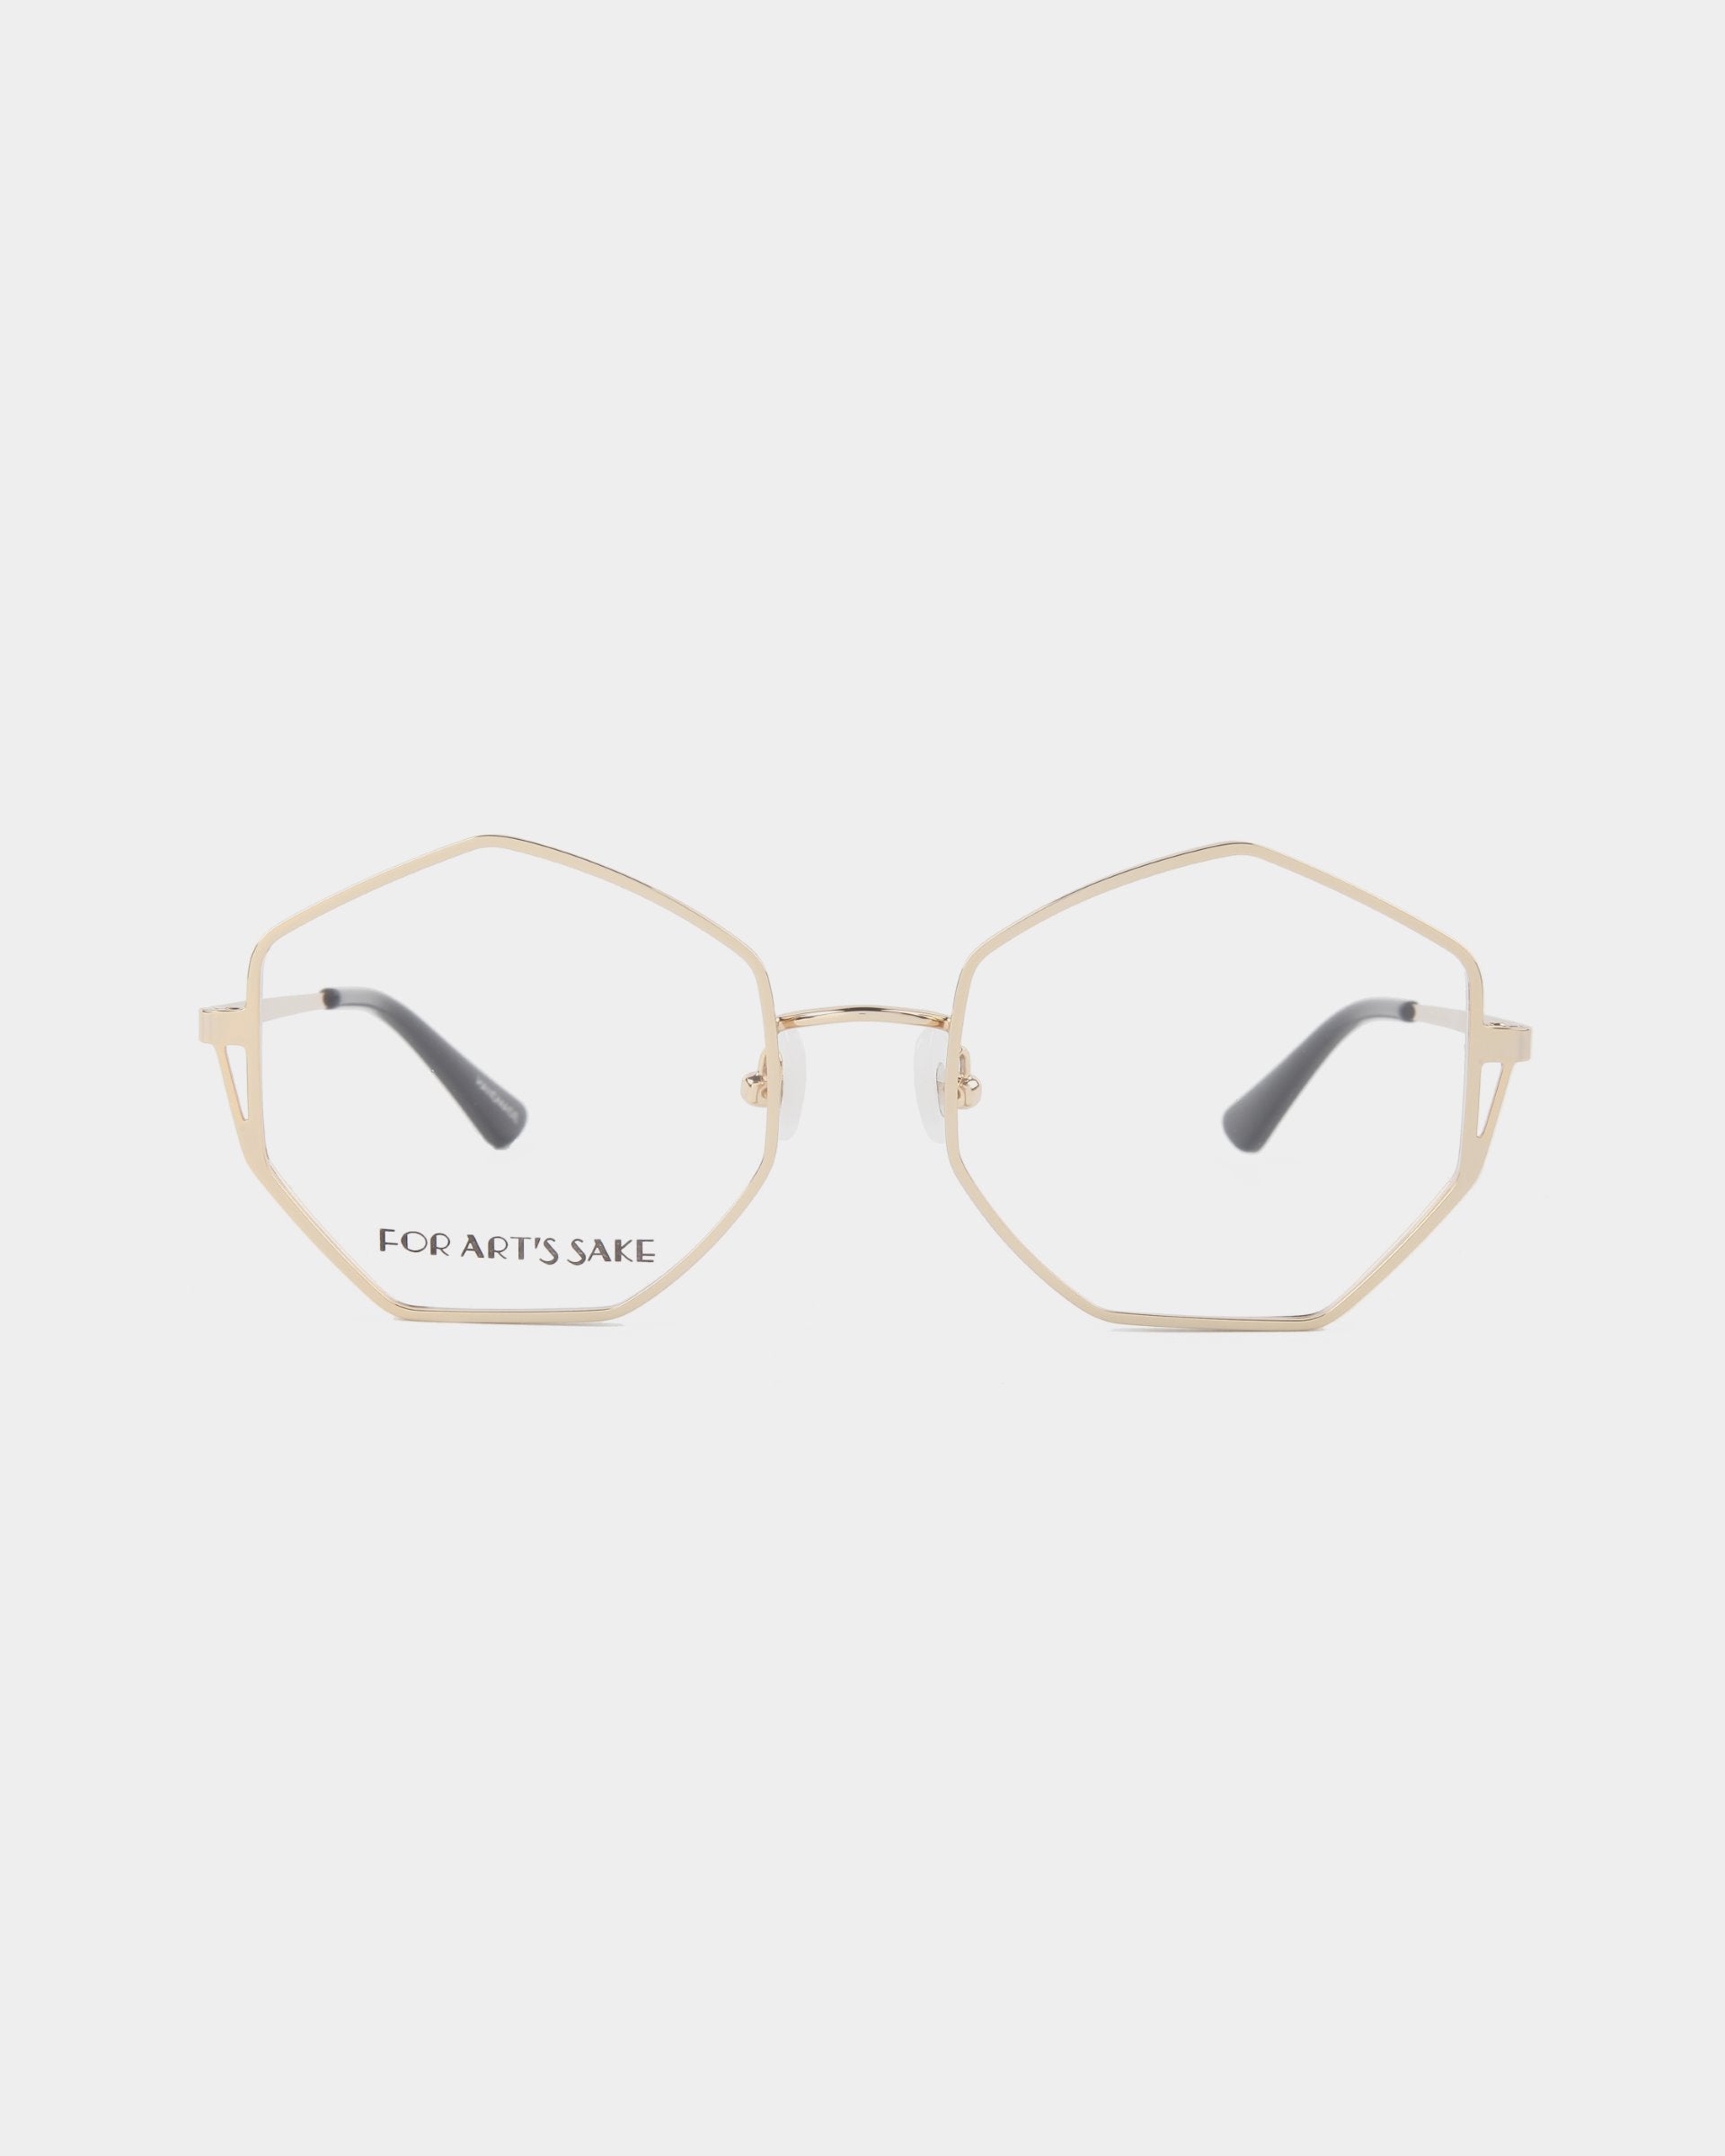 The Antidote by For Art's Sake® is a pair of eyeglasses with geometric, 18-karat gold-plated stainless steel frames and transparent lenses. The temples are adorned with black tips for added comfort.